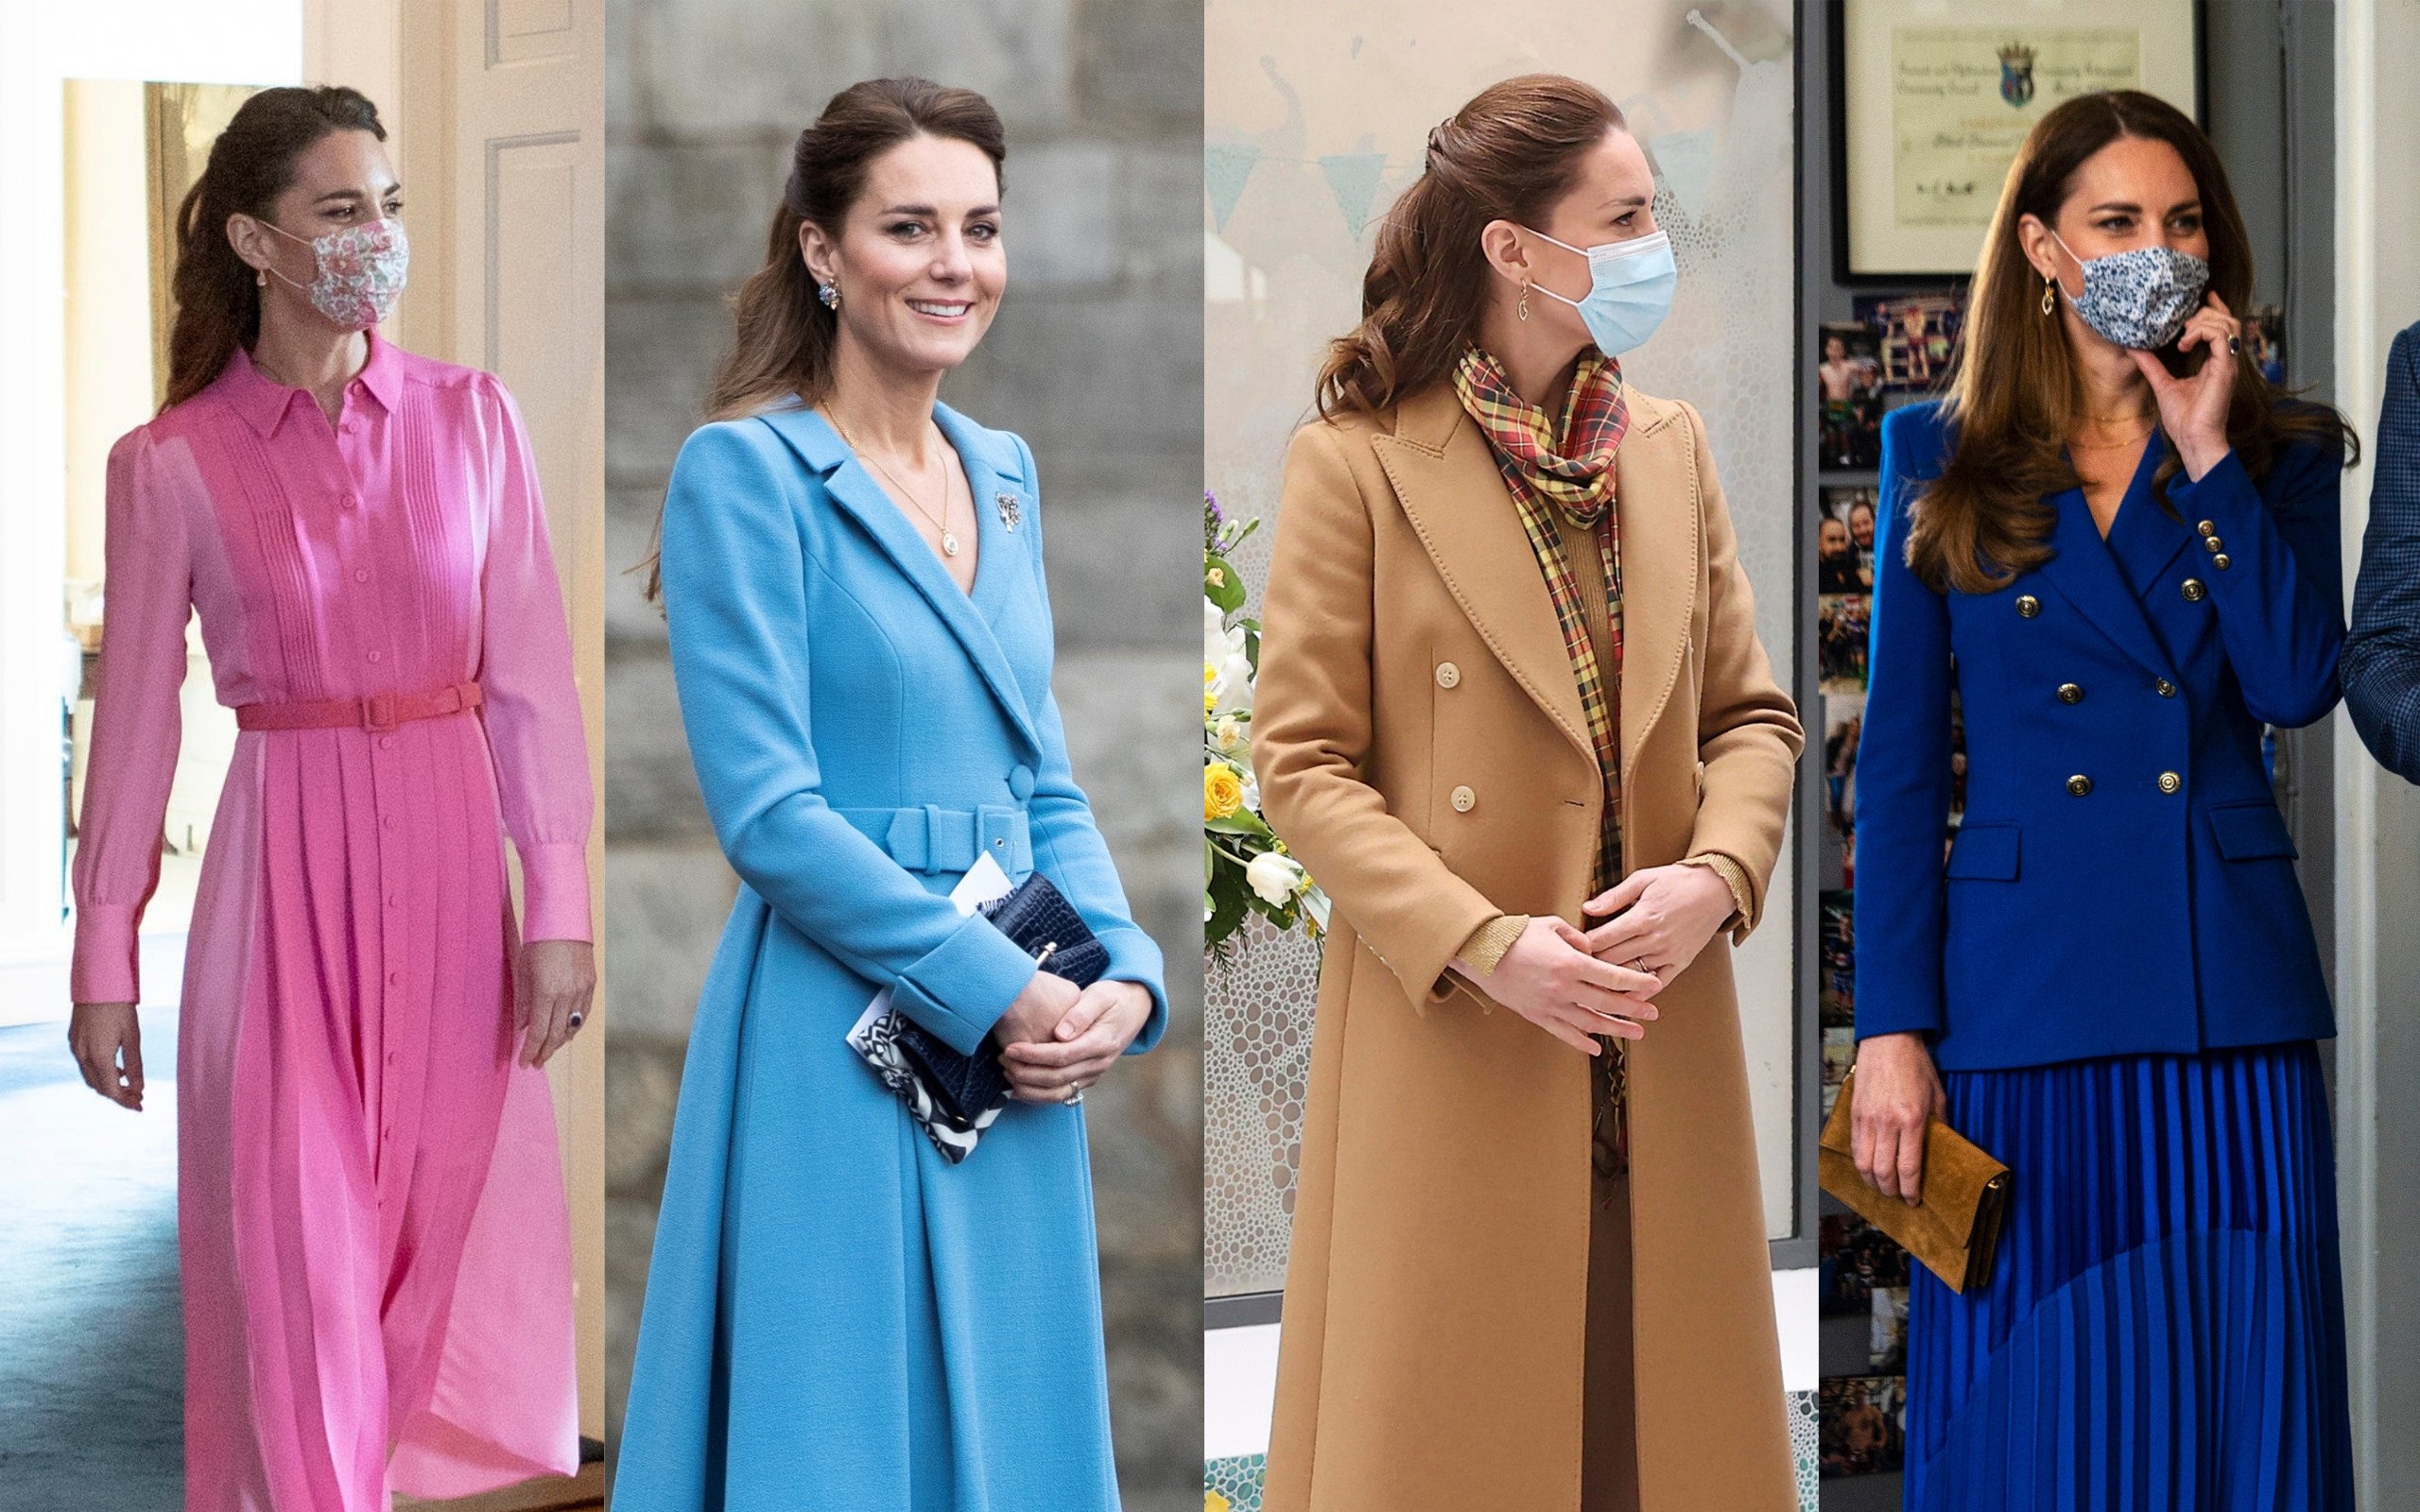 One trip to Scotland, multiple looks: Kate Middleton’s best outfits from May 2021. Photo: AP; Reuters